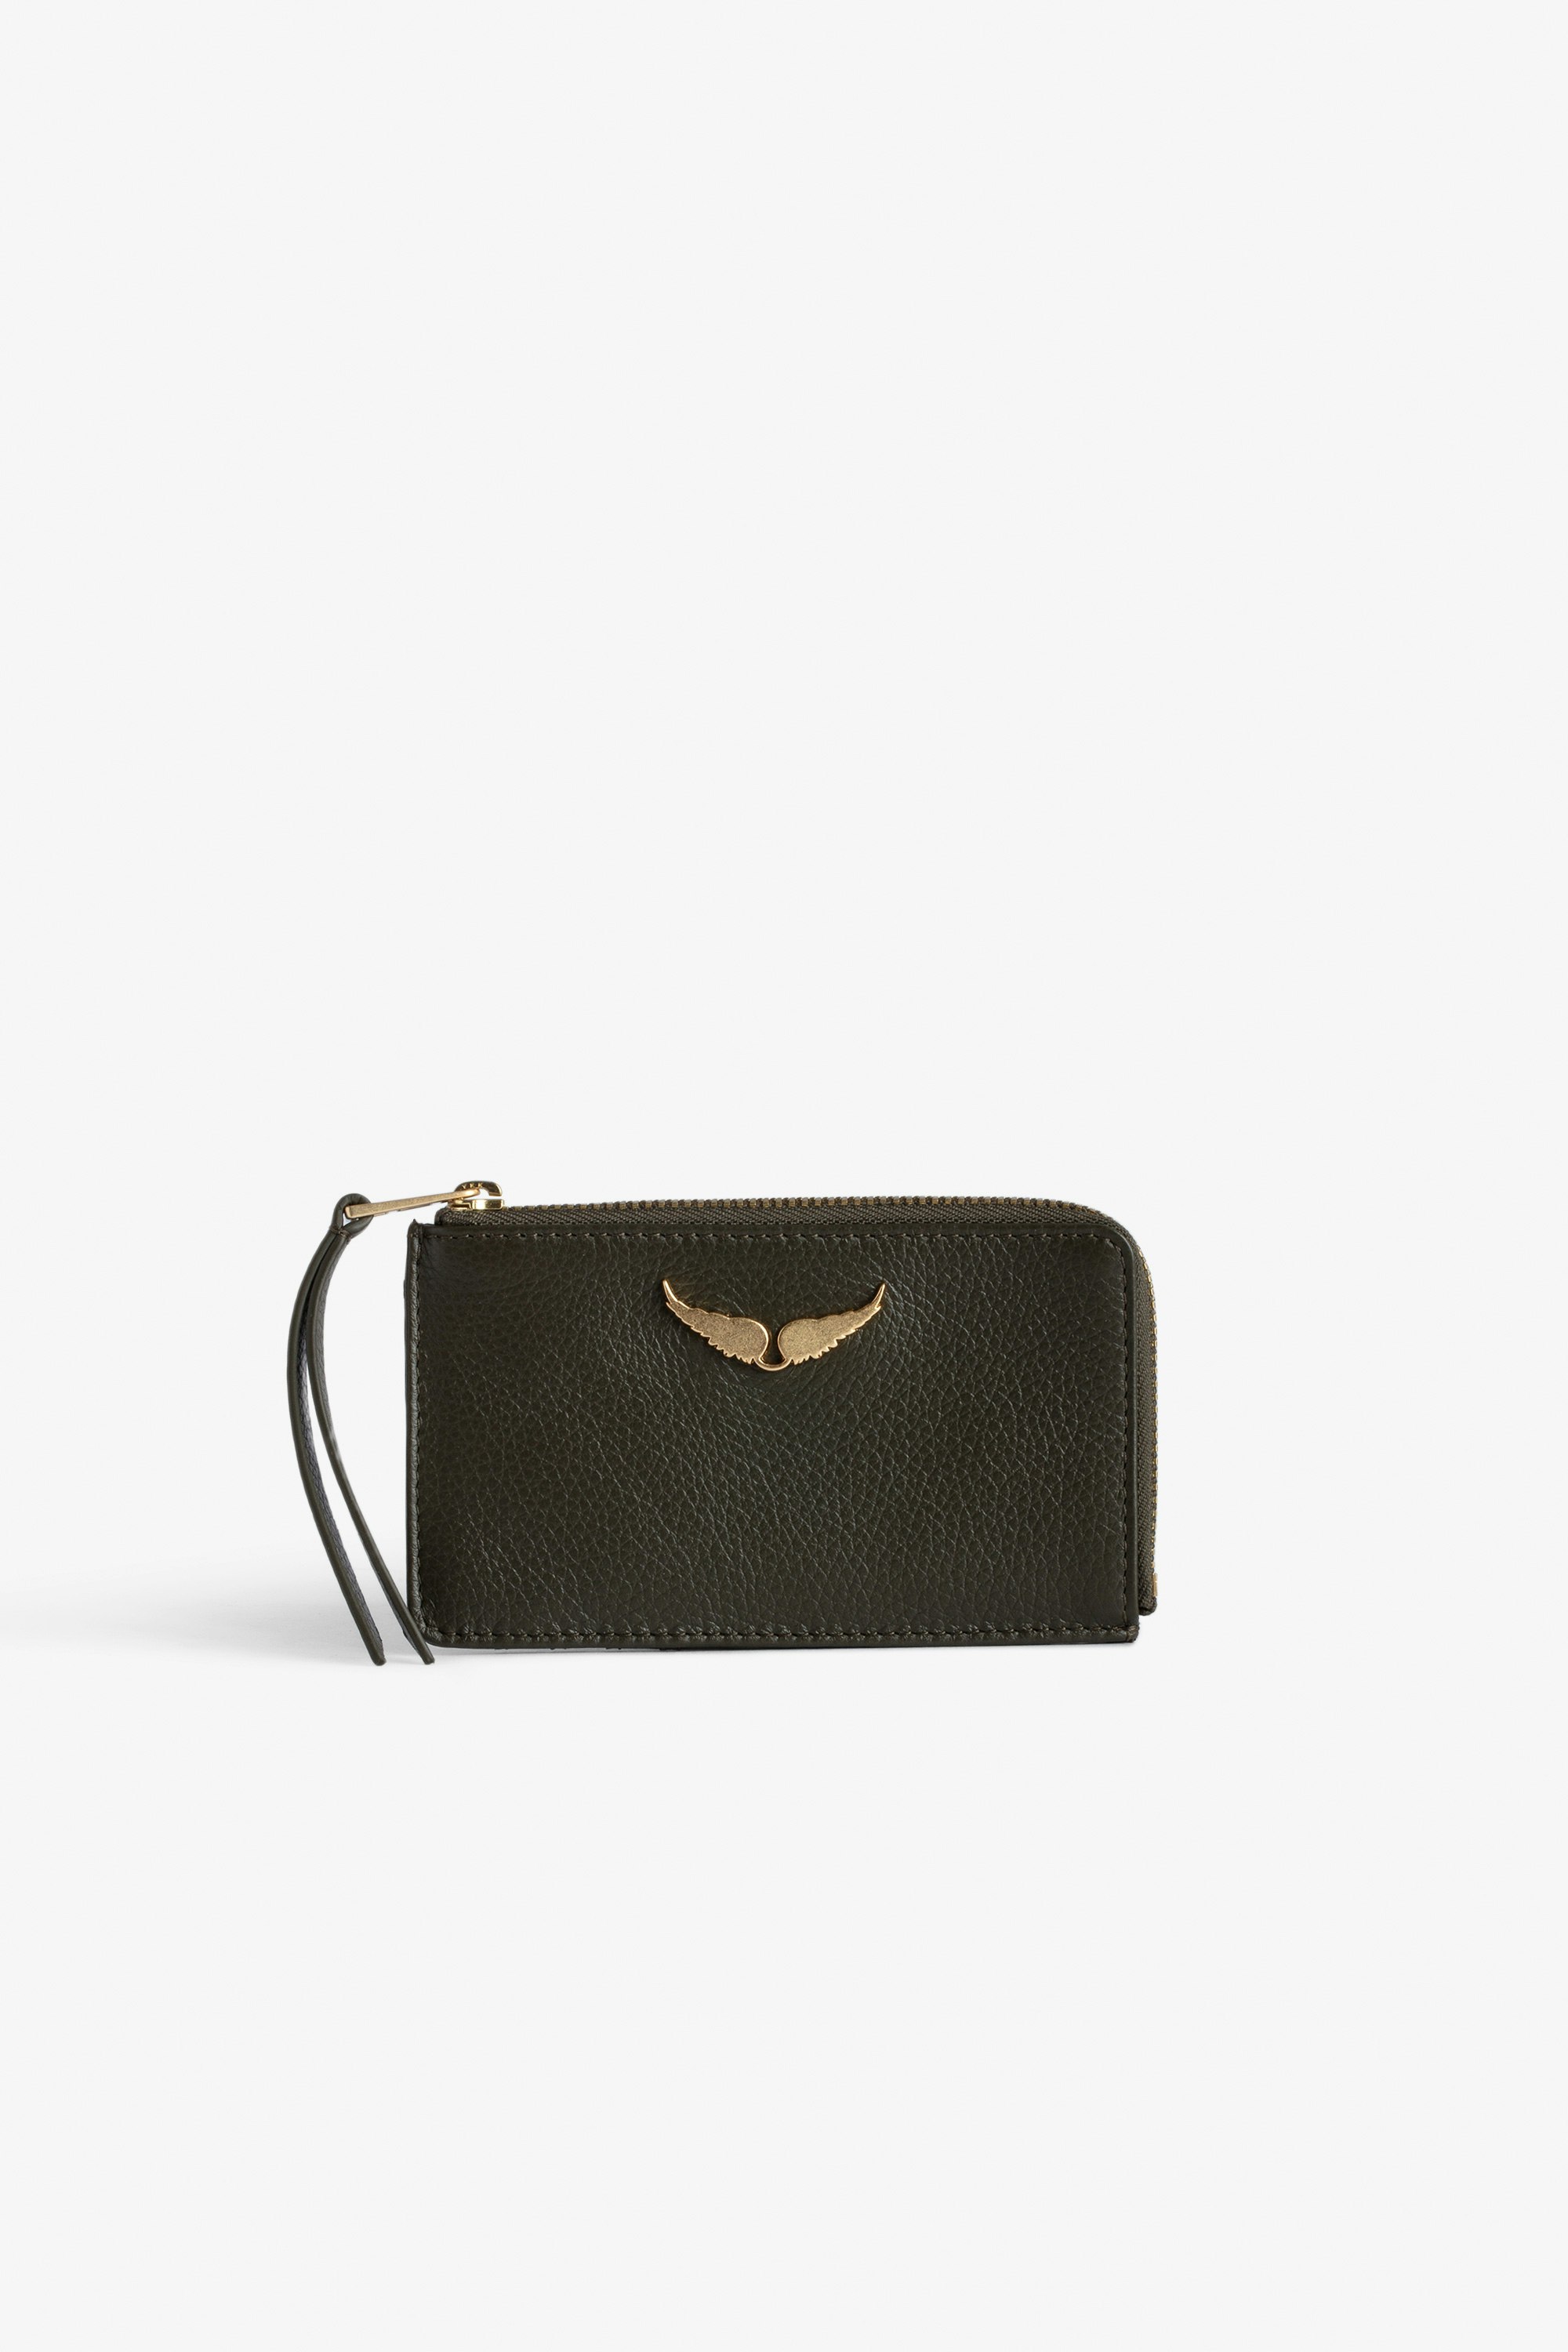 ZV Card 財布 - Women’s khaki grained leather card holder with wings charm.